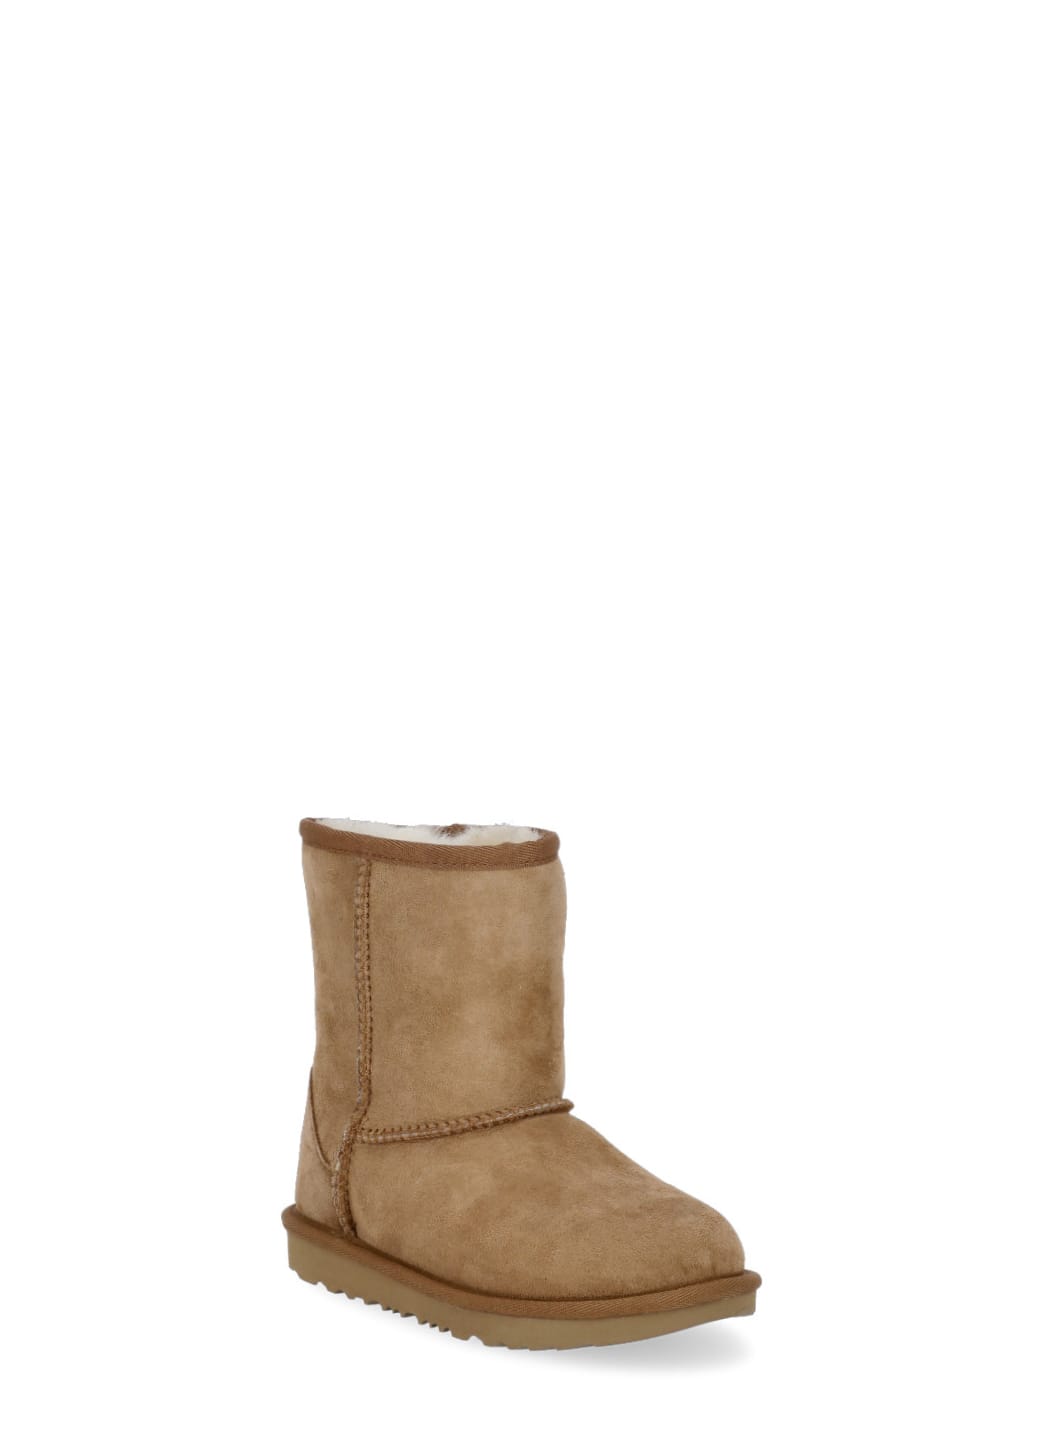 Shop Ugg Classic Ii Boots In Che